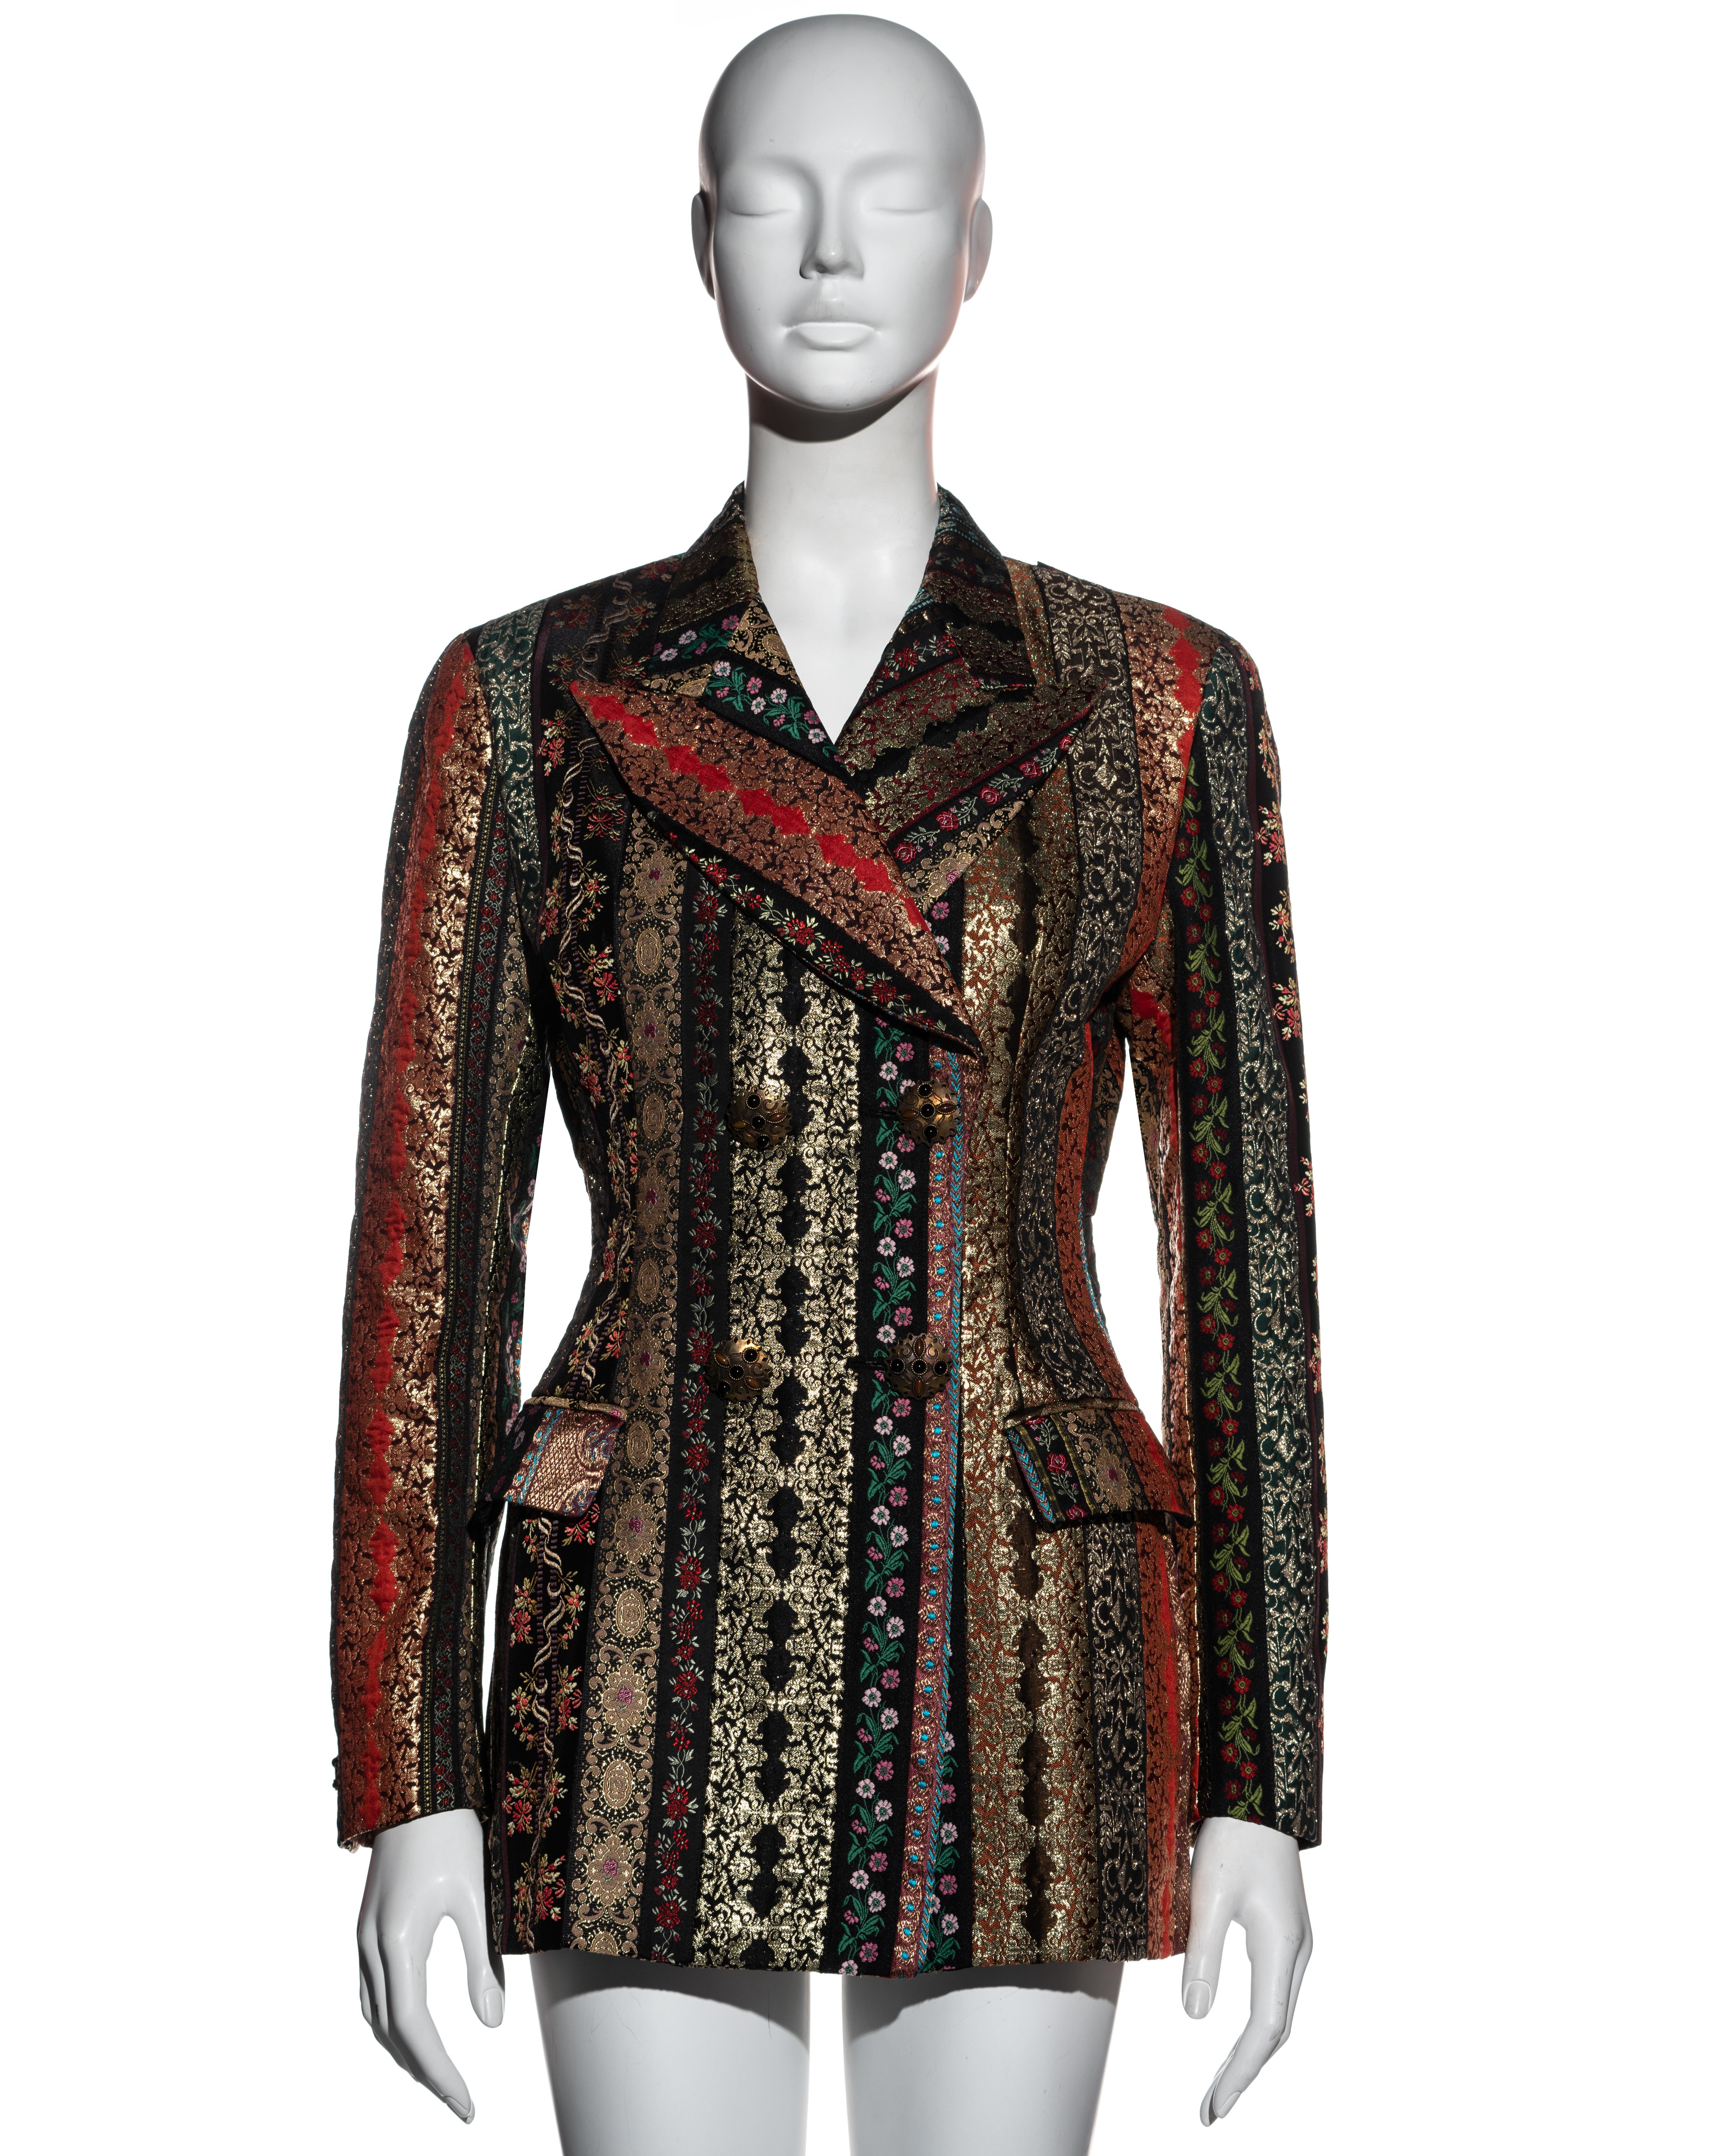 ▪ Dolce & Gabbana multicoloured double-breasted blazer jacket
▪ The textile consists of a patchwork of colourful lamé brocades and floral jacquards 
▪ Large antique-style metal buttons
▪ 2 front flap pockets
▪ Peak lapels 
▪ Accentuated waist
▪ IT